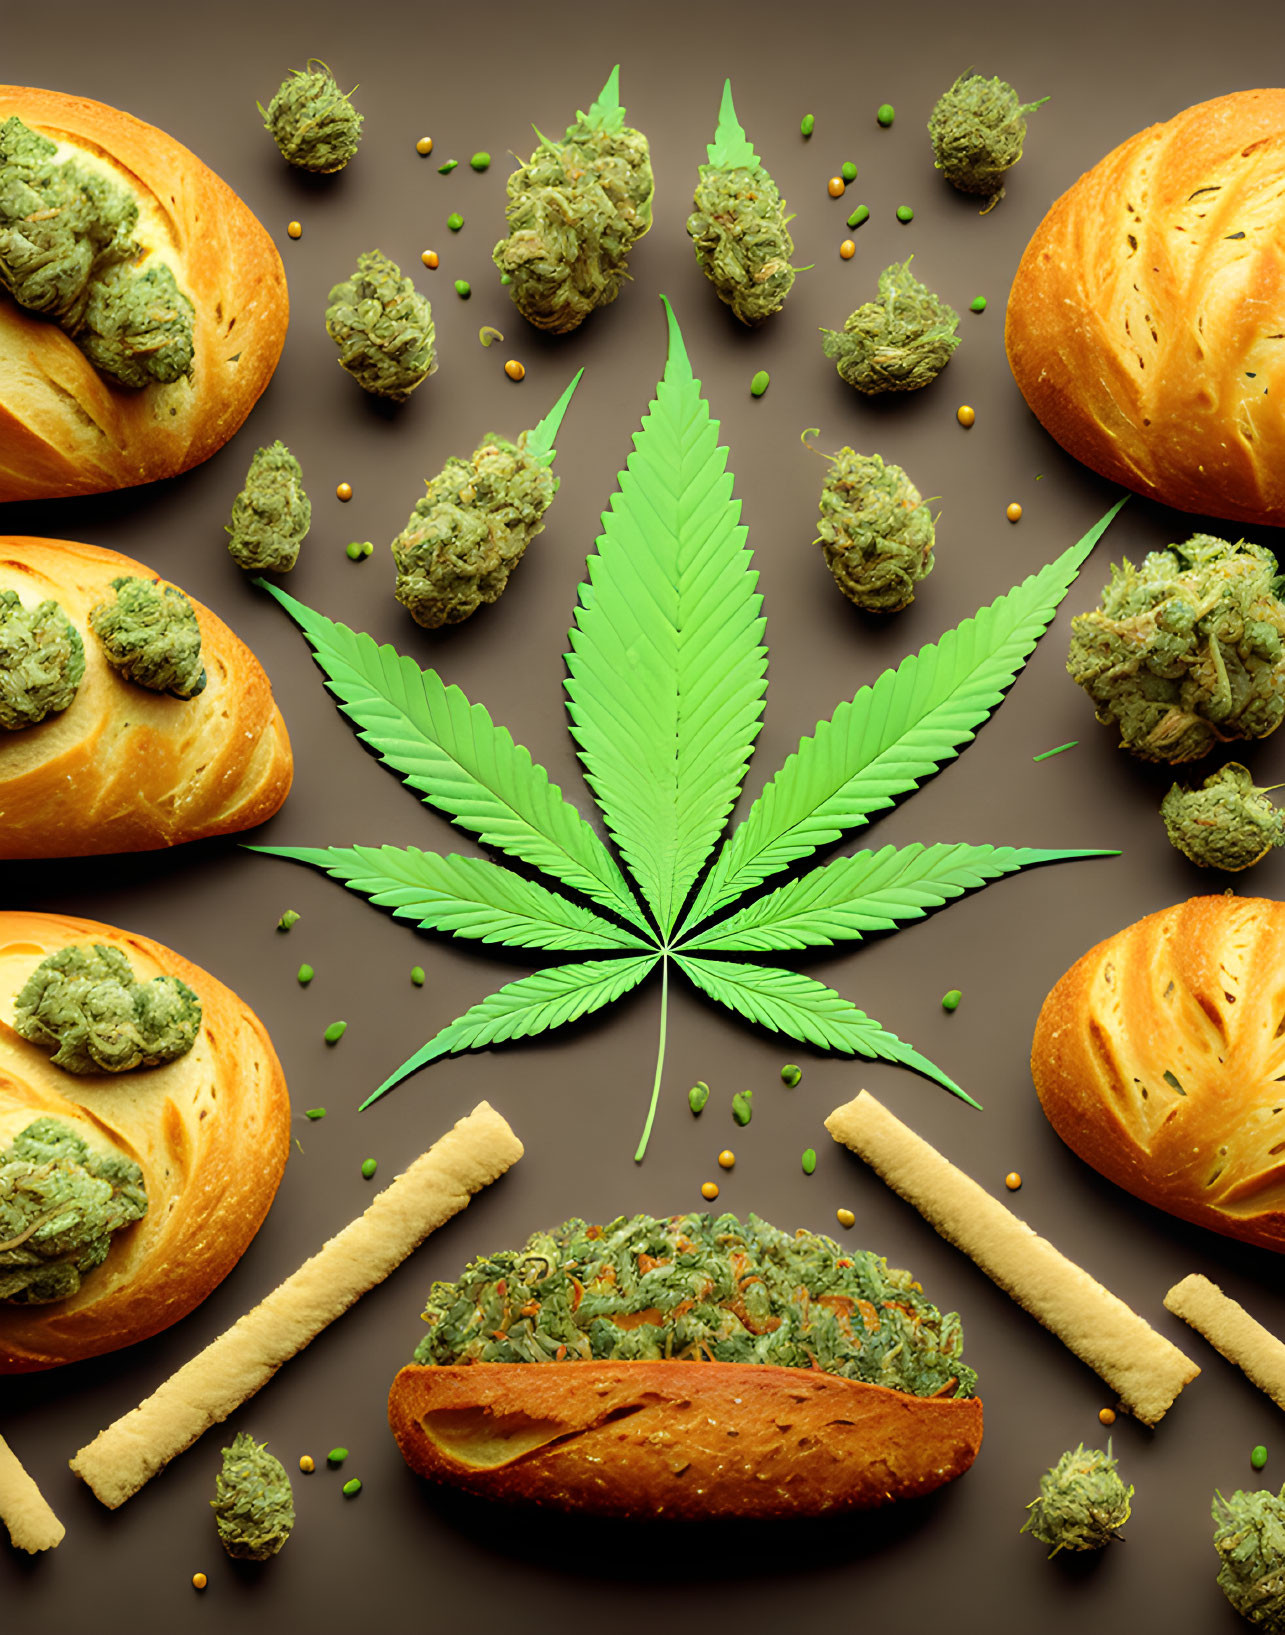 Freshly Baked Bread Loaves Display with Cannabis Leaf, Buds, and Joints